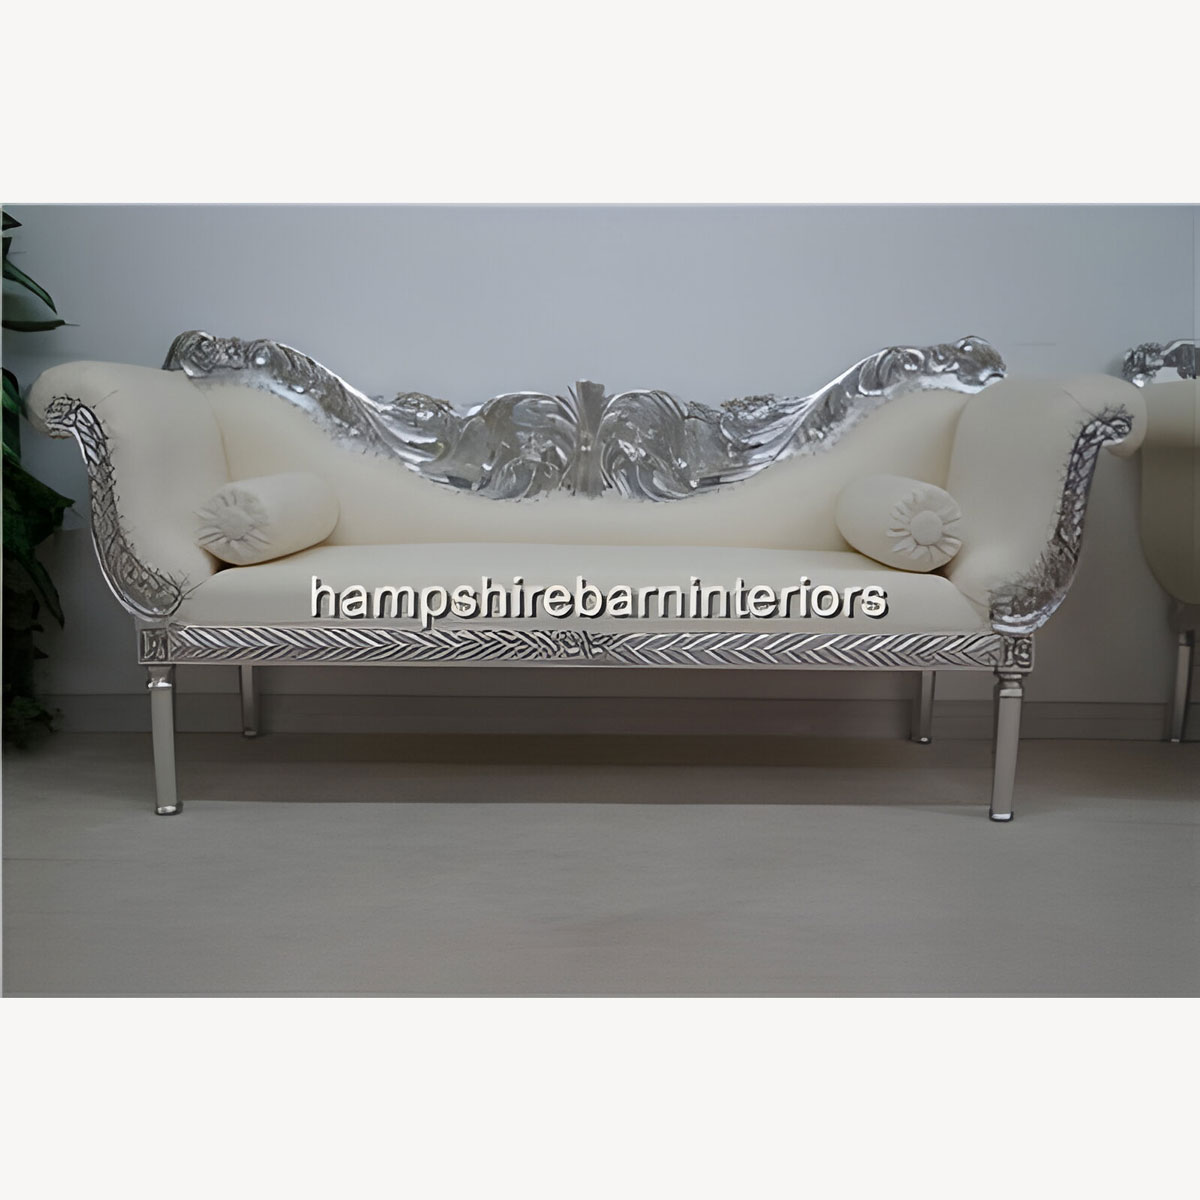 A Prianka 3 Piece Wedding Set Sofa Plus Two Chairs In Silver Leaf And White Faux Leather 1 - Hampshire Barn Interiors - A Prianka 3 Piece Wedding Set (Sofa Plus Two Chairs) In Silver Leaf And White Faux Leather -